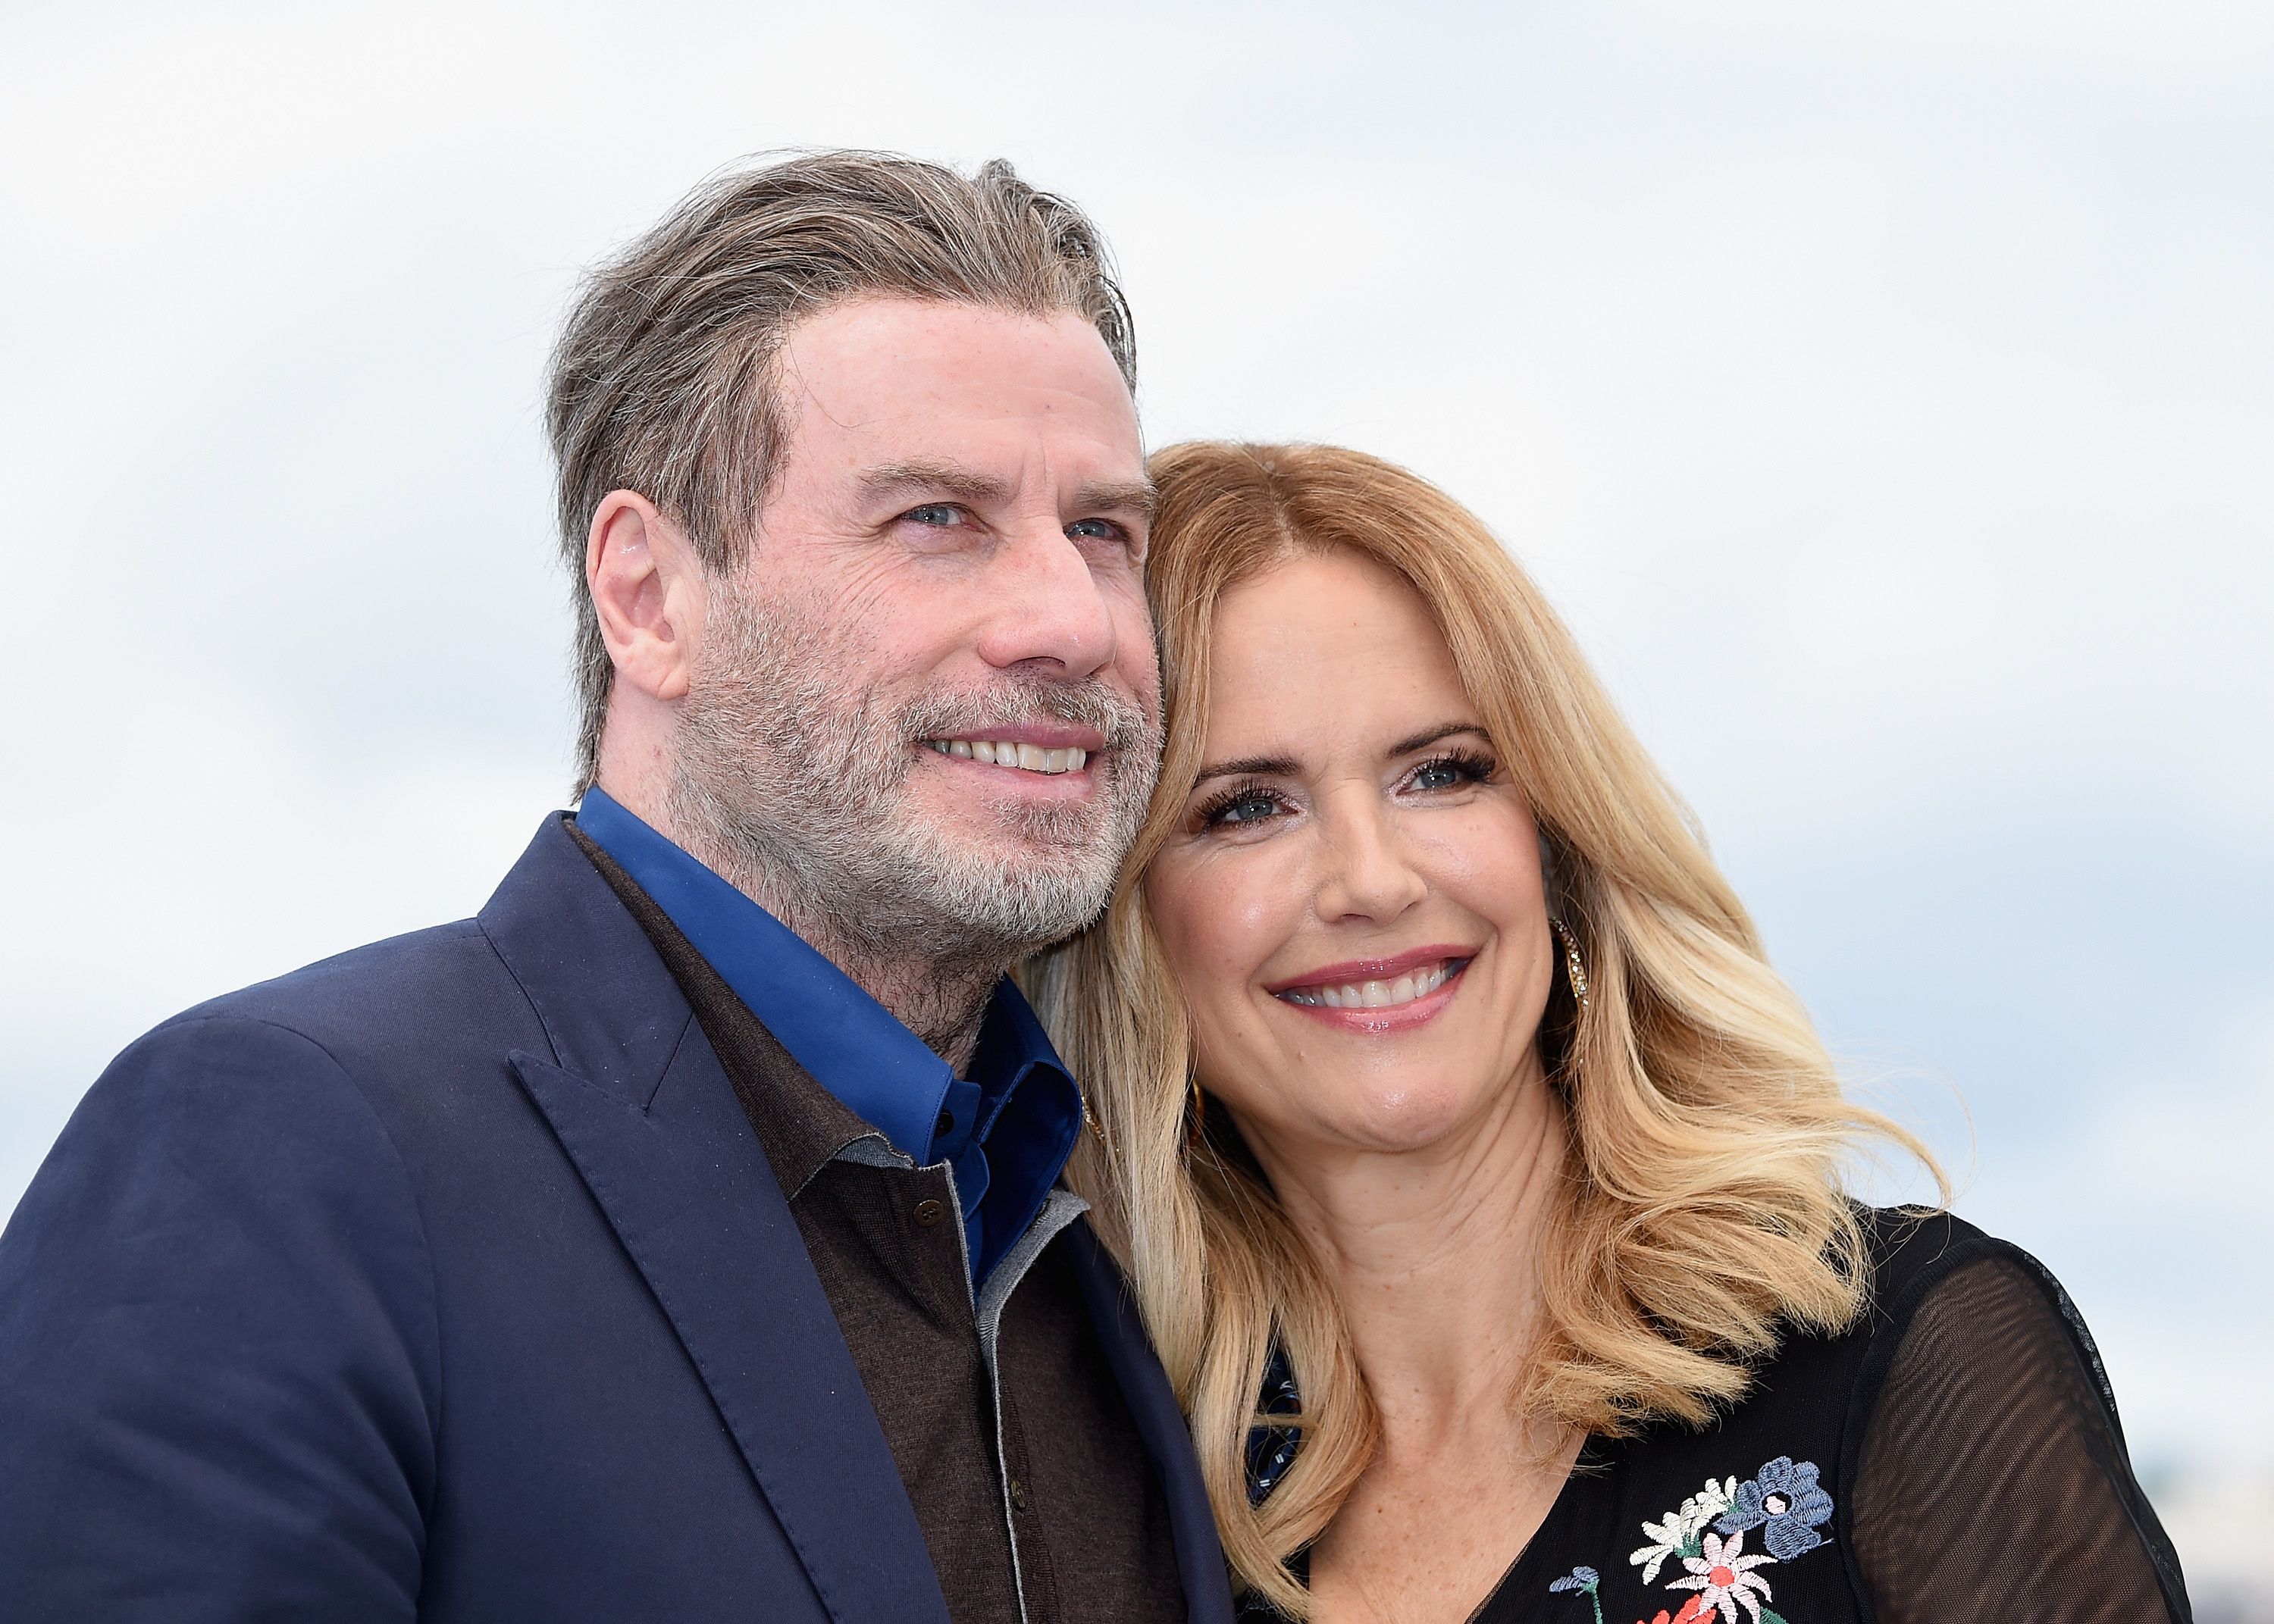  John Travolta and Kelly Preston at the 71st annual Cannes Film Festival in 2018 | Photo: Getty Images